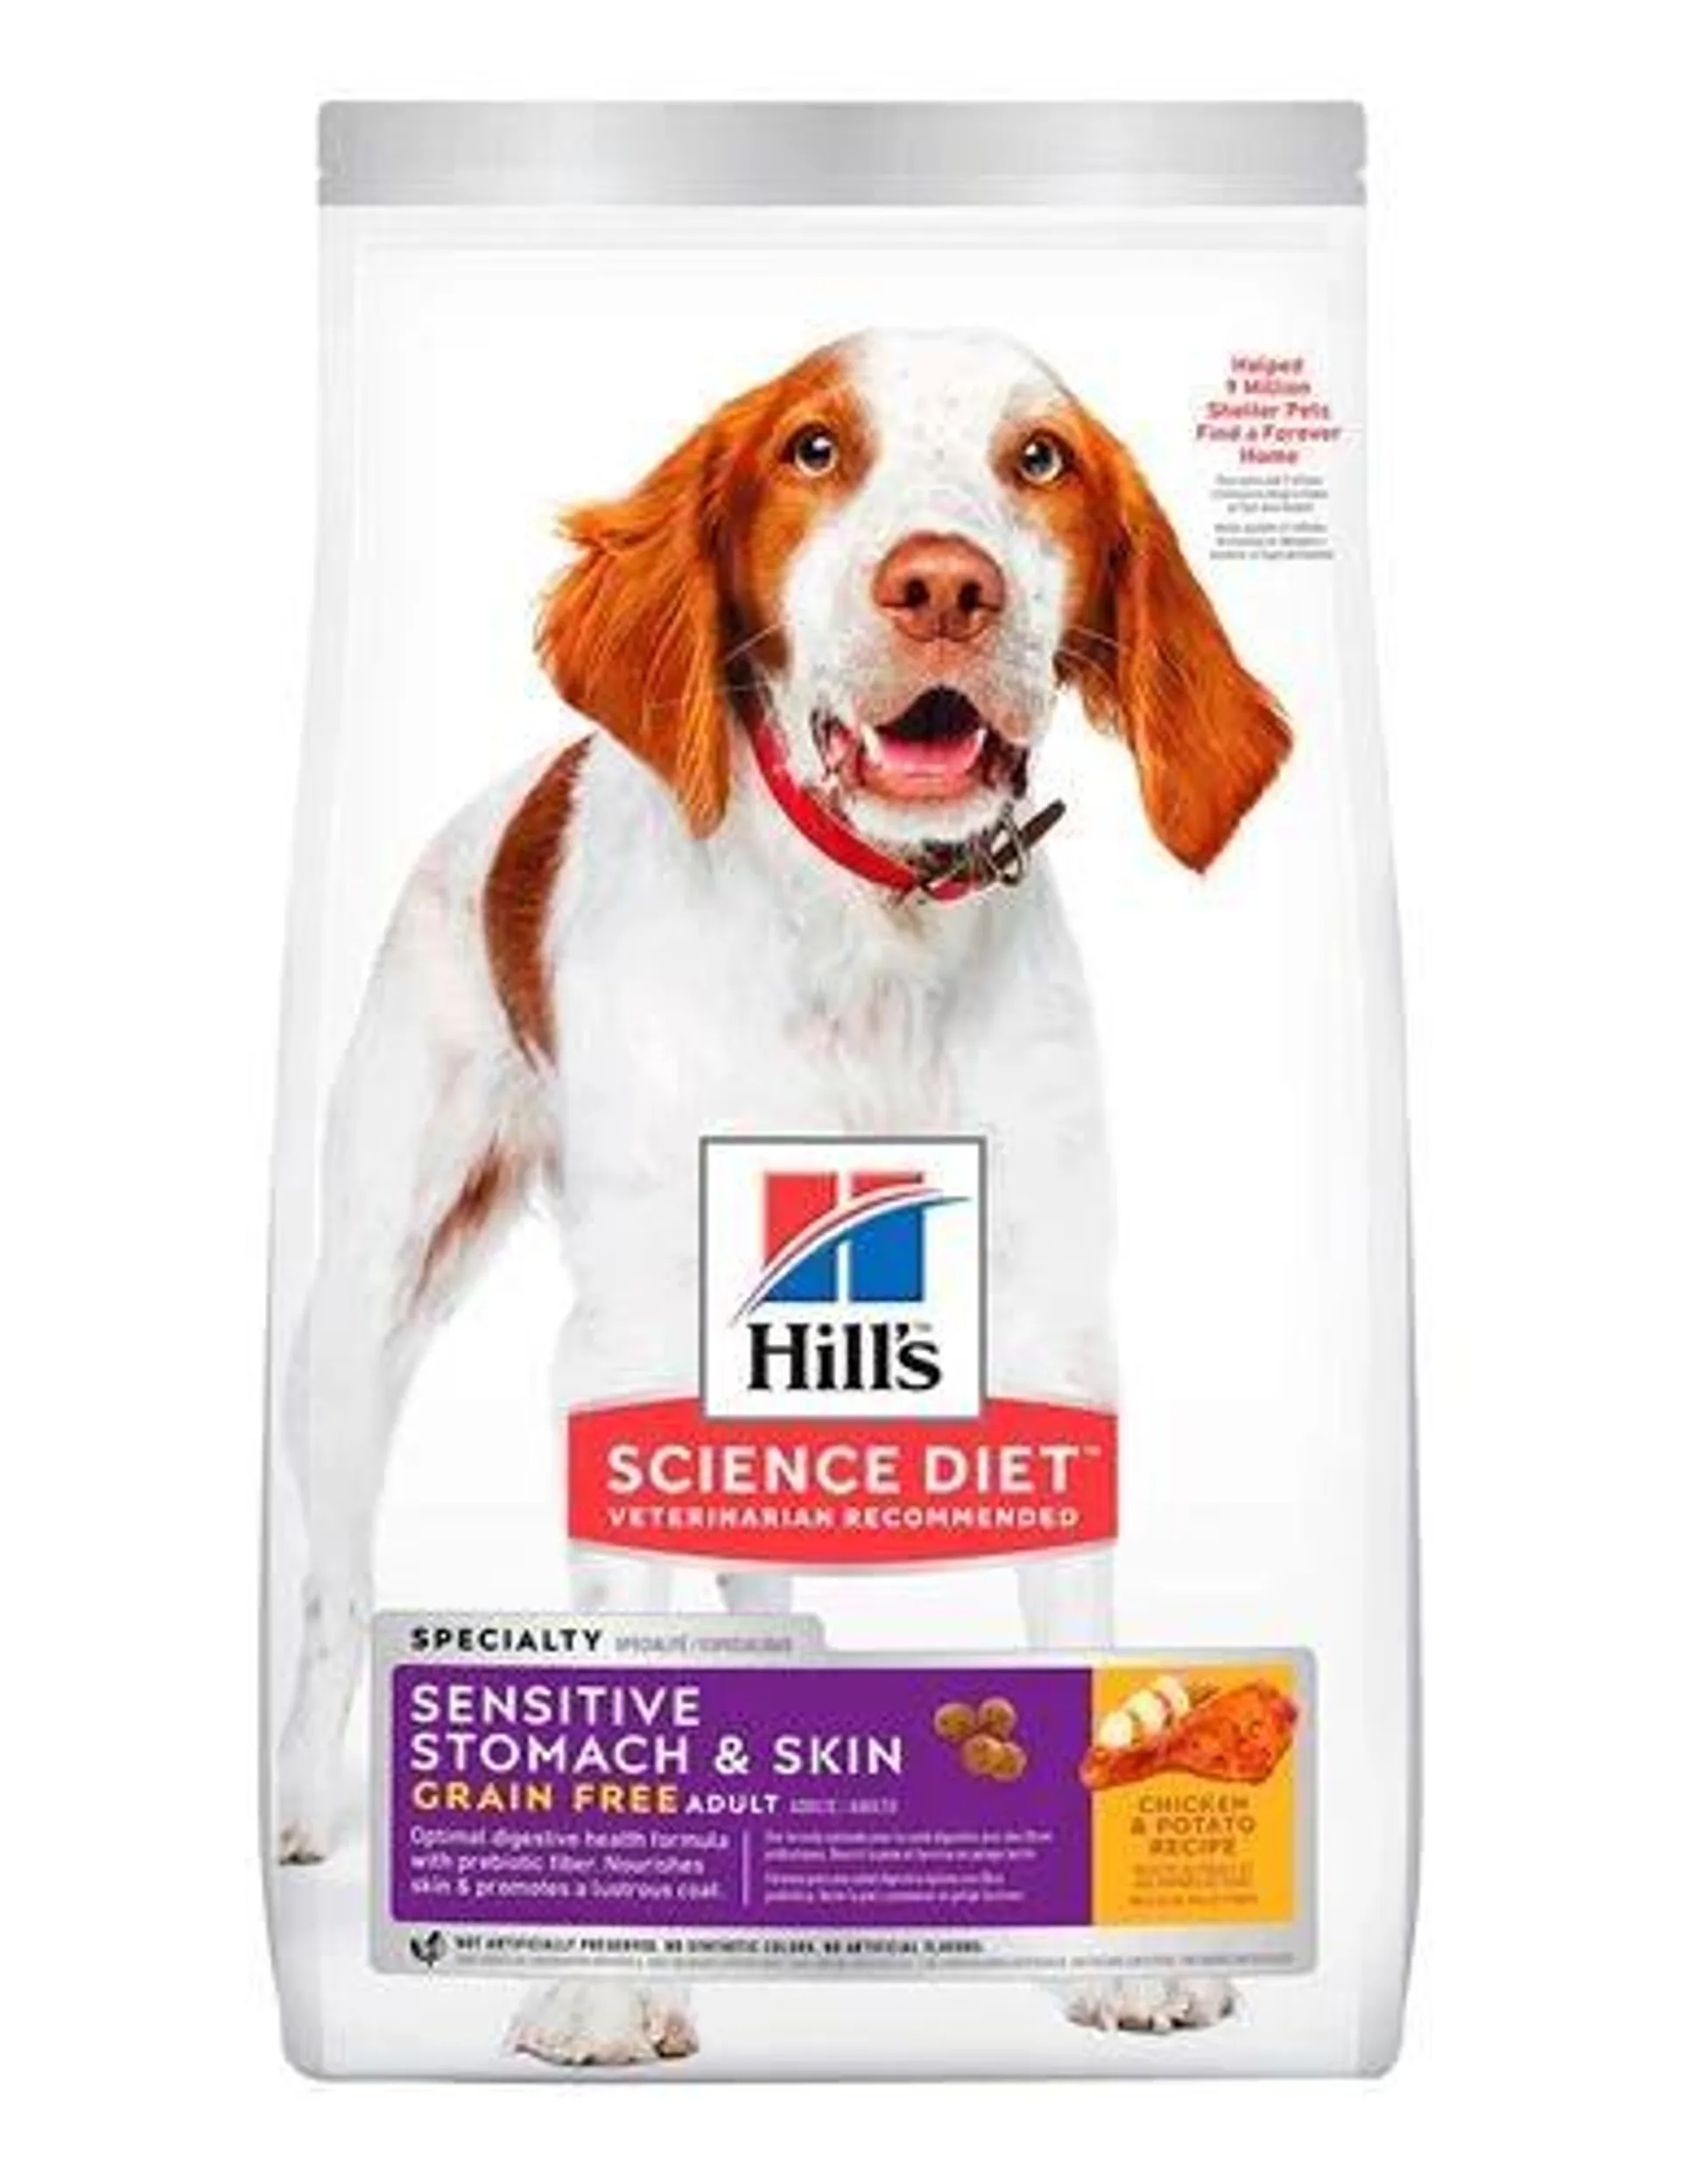 Hill's Science Diet Dog Food Adult Grain-Free Sensitive Stomach and Skin, 24 Pounds